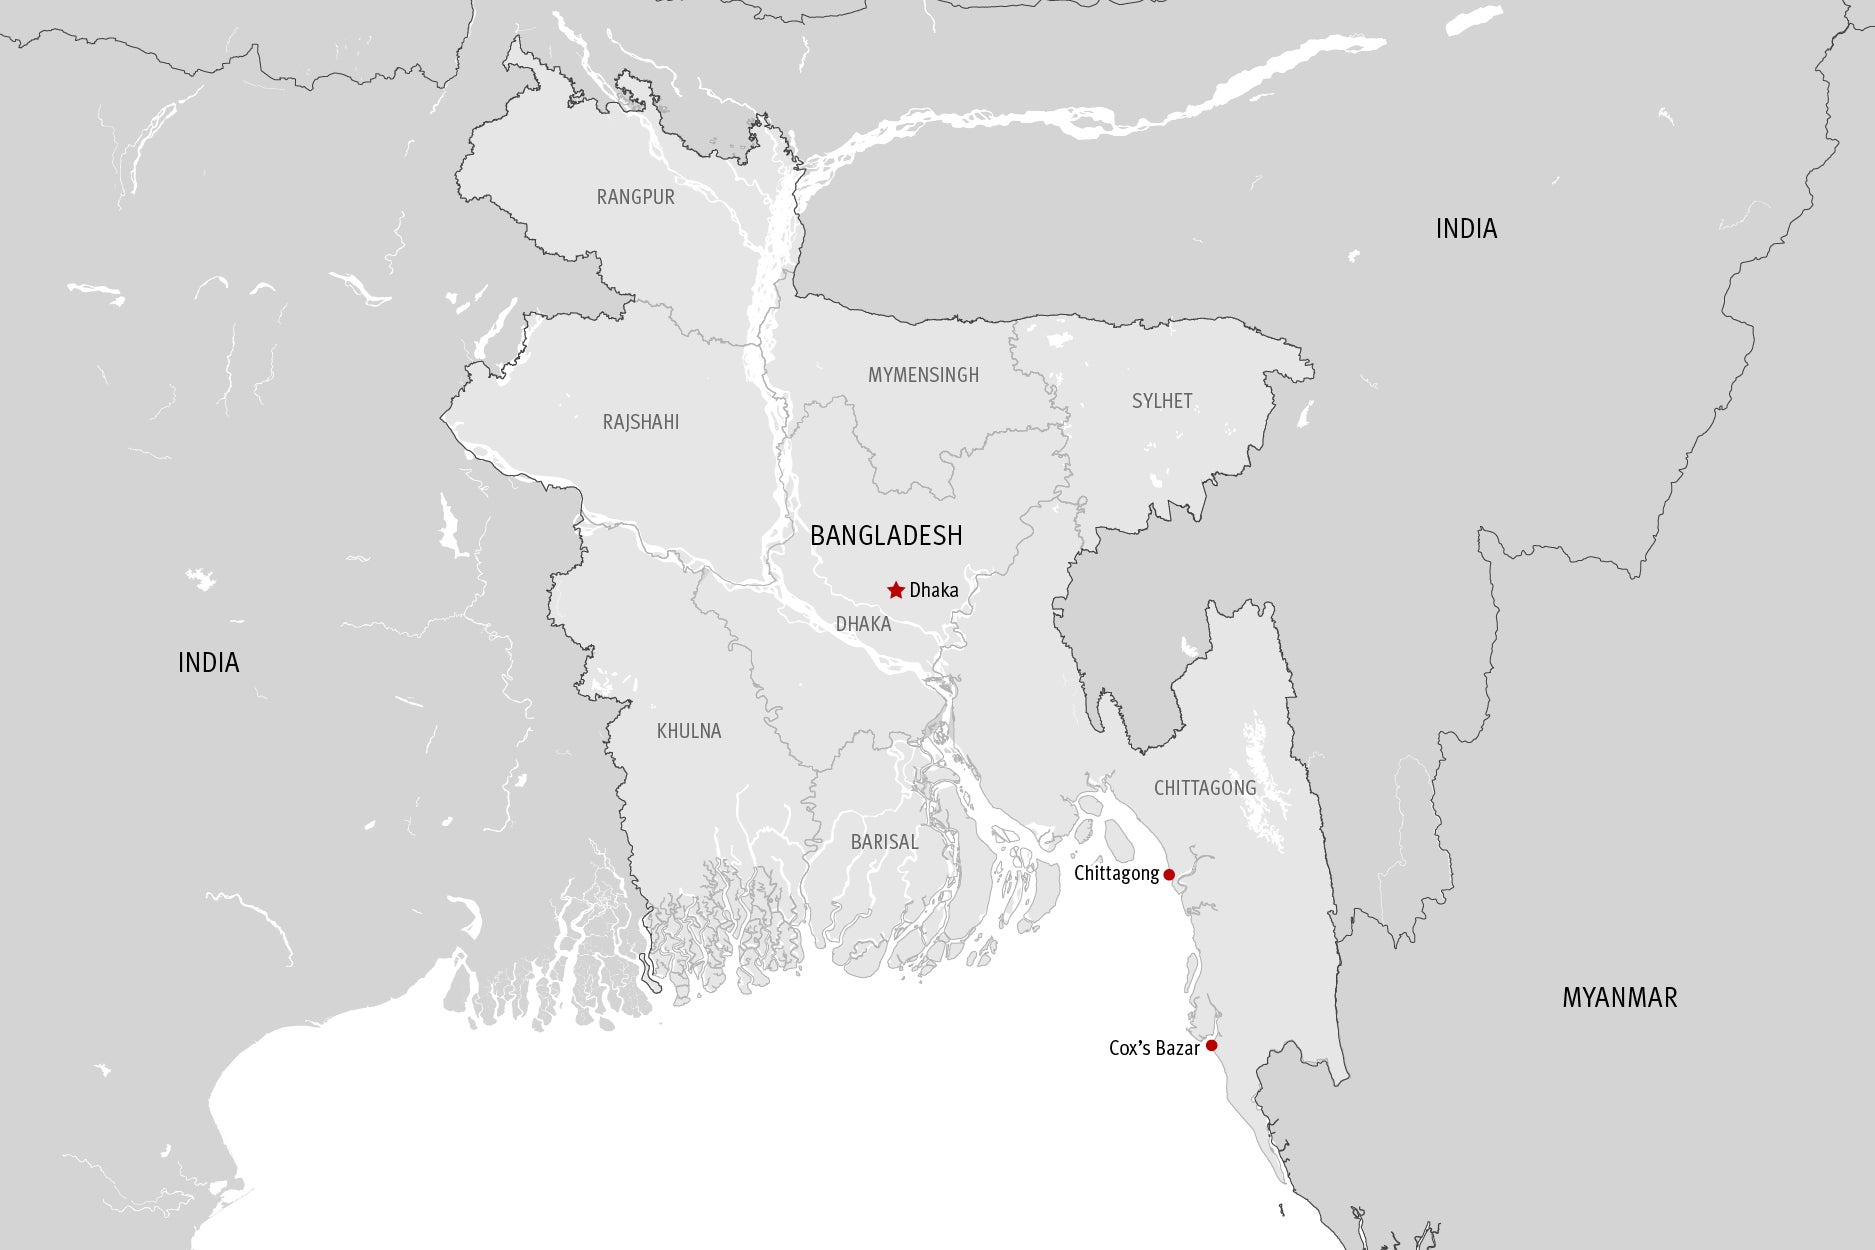 A map showing the provinces of Bangladesh